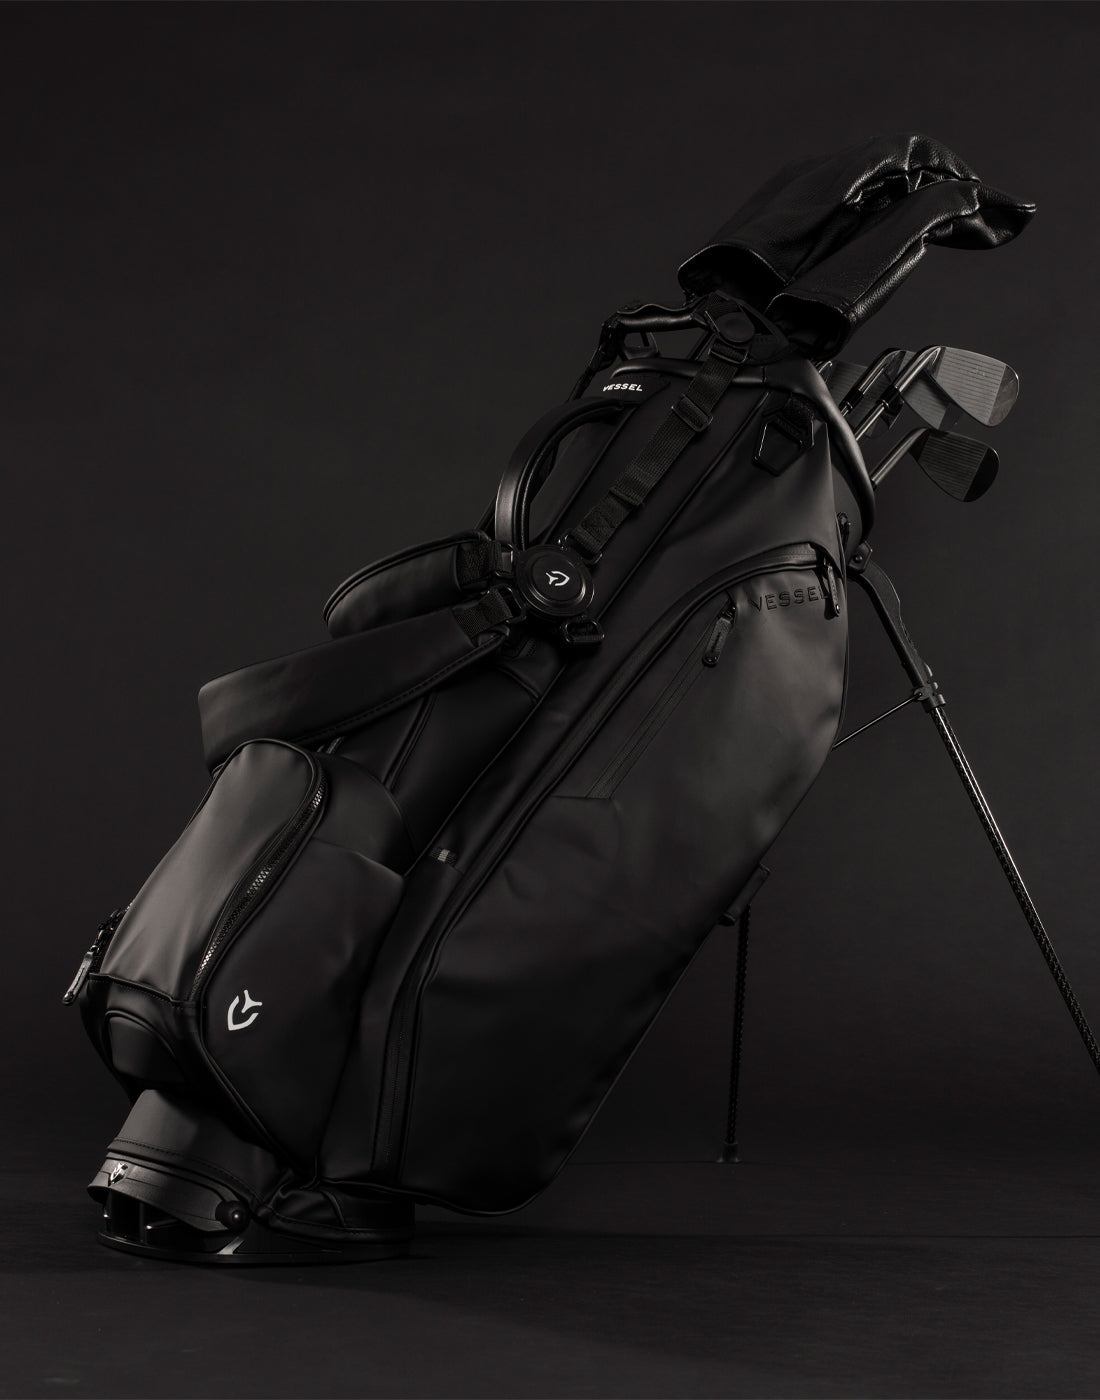 Black golf stand bag filled with golf clubs propped up in black studio